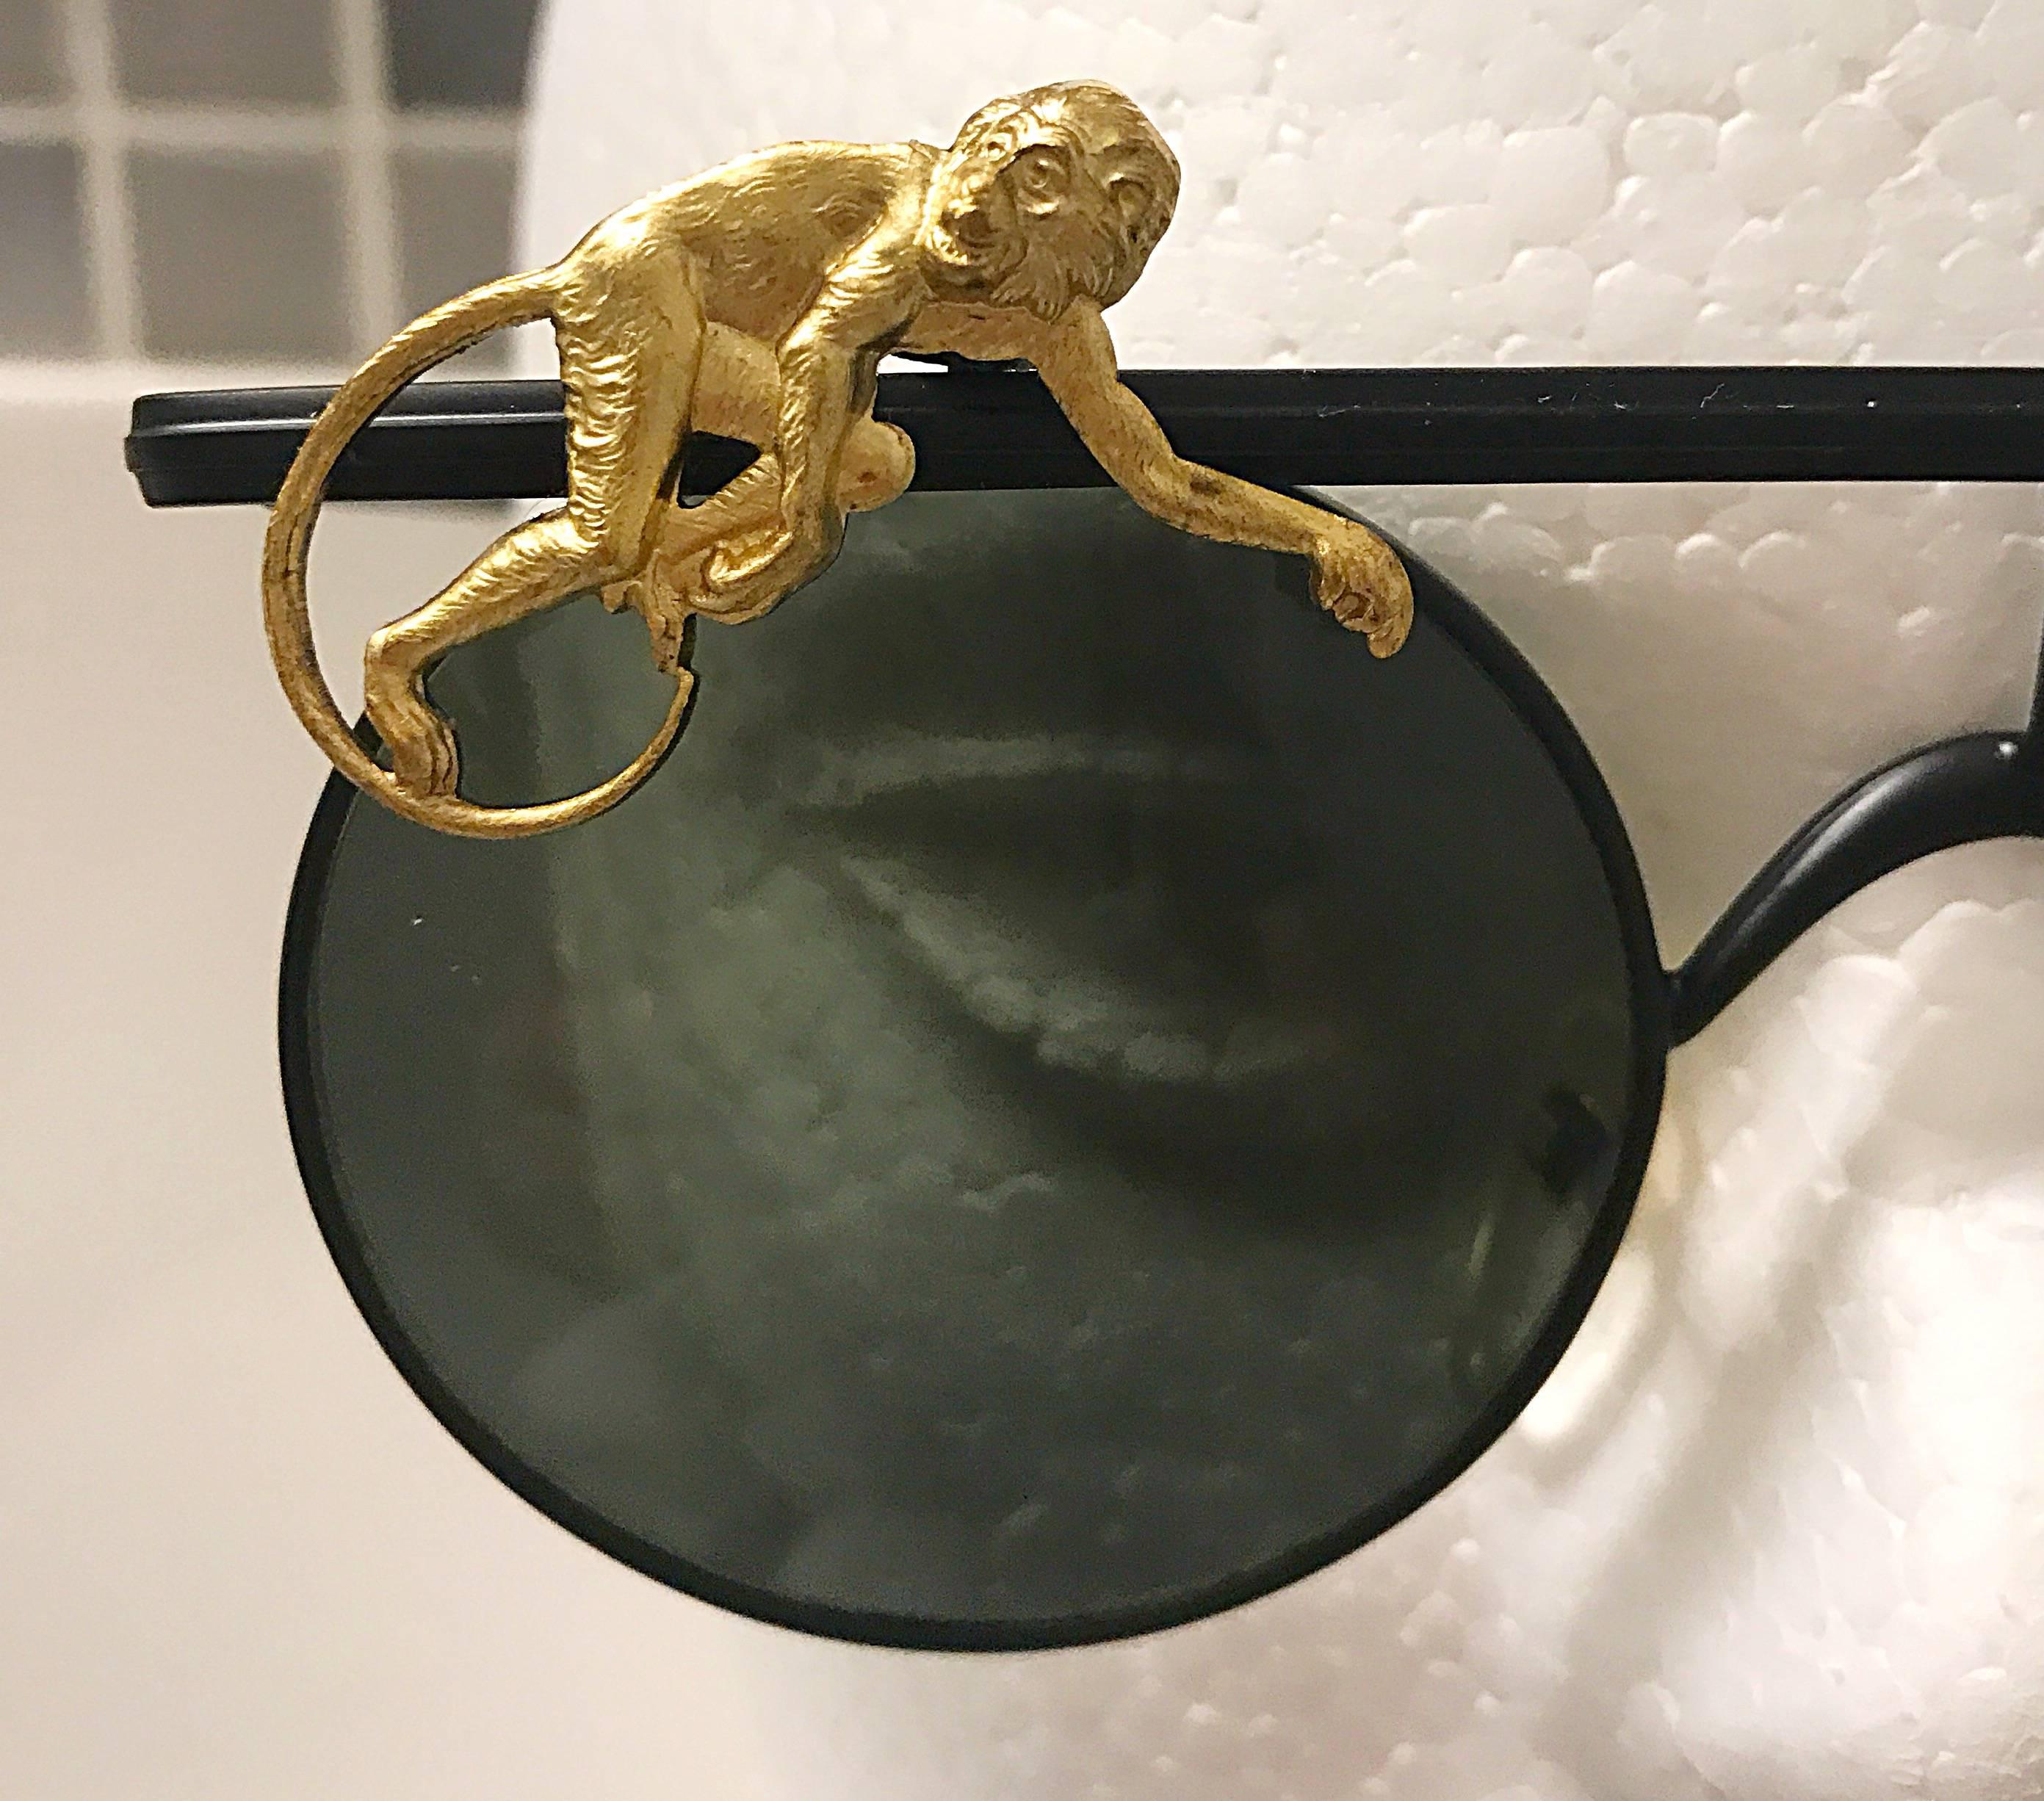 Amazing and super rare 90s MERCURA unisex novelty 'flying monkeys' black and gold round sunglasses! Mercura sunglasses are highly sought after, and are extremely hard to find! Features a black metal bar above the rim of the glasses with a gold